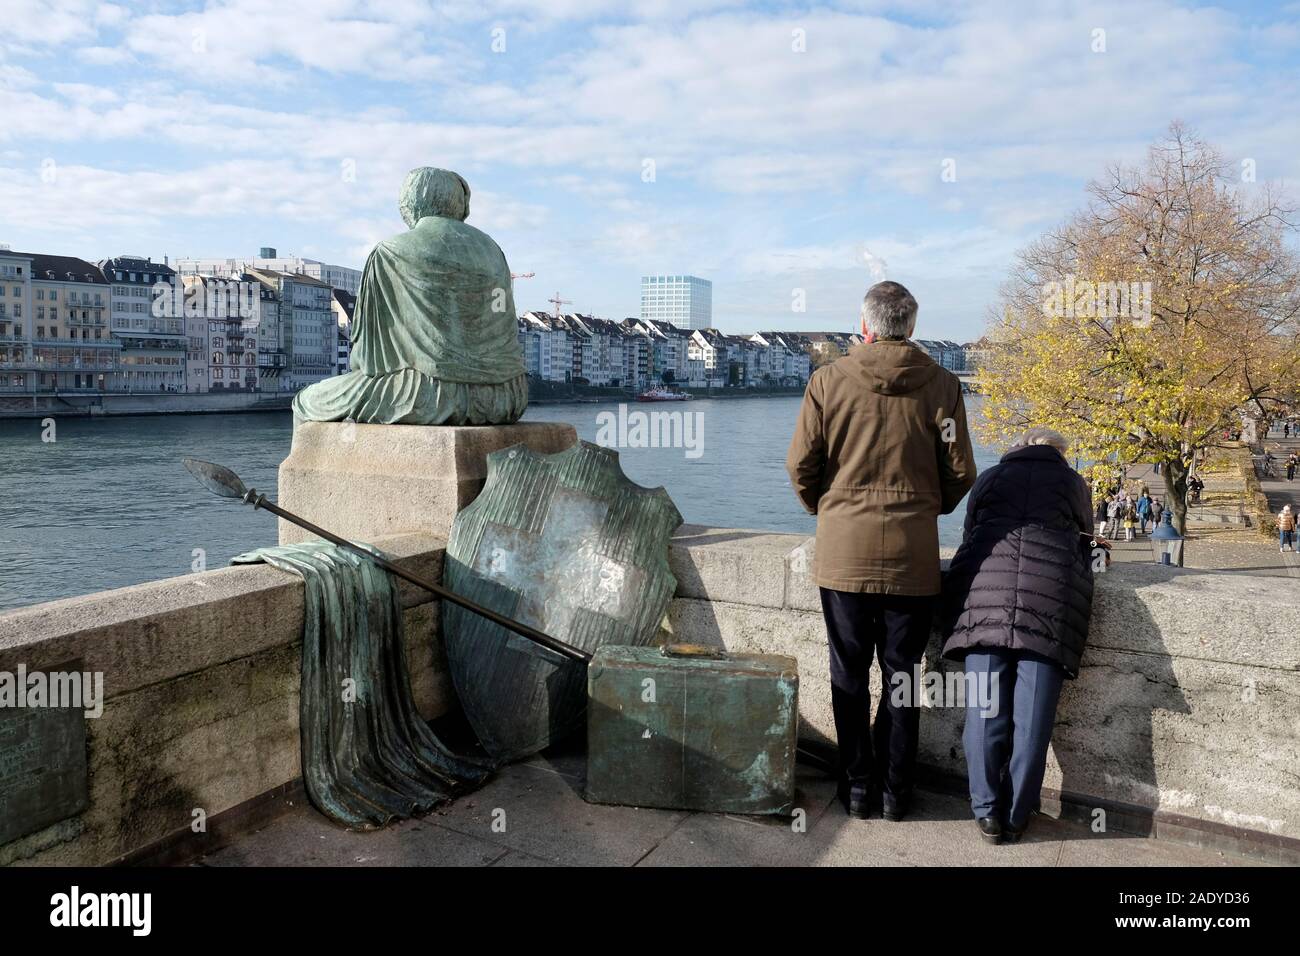 Two people standing next to Helvetia statue, Basel, Switzerland Stock Photo